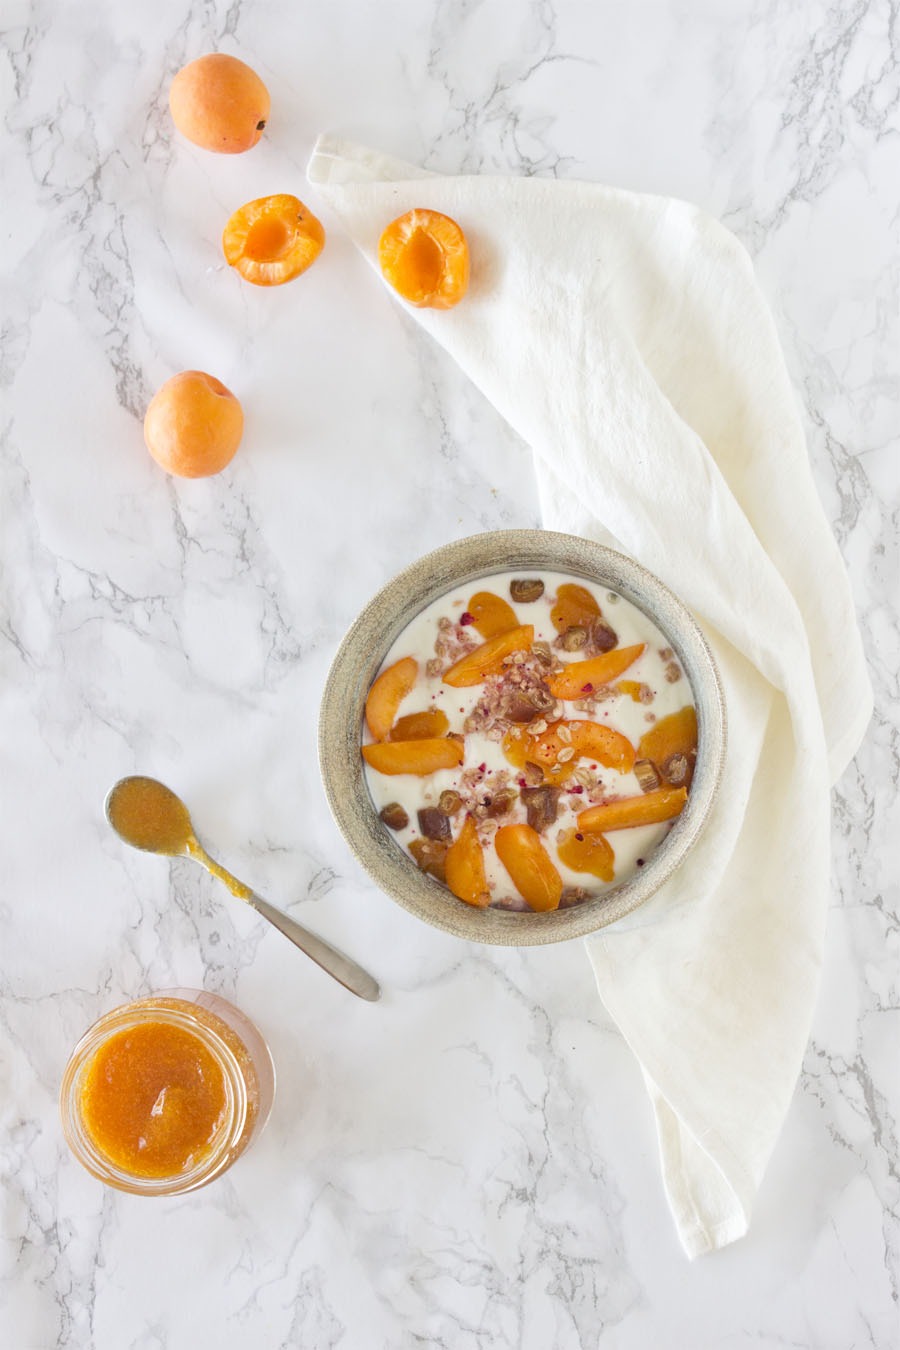 Apricot jam breakfast bowl recipe | LOOK WHAT I MADE ...